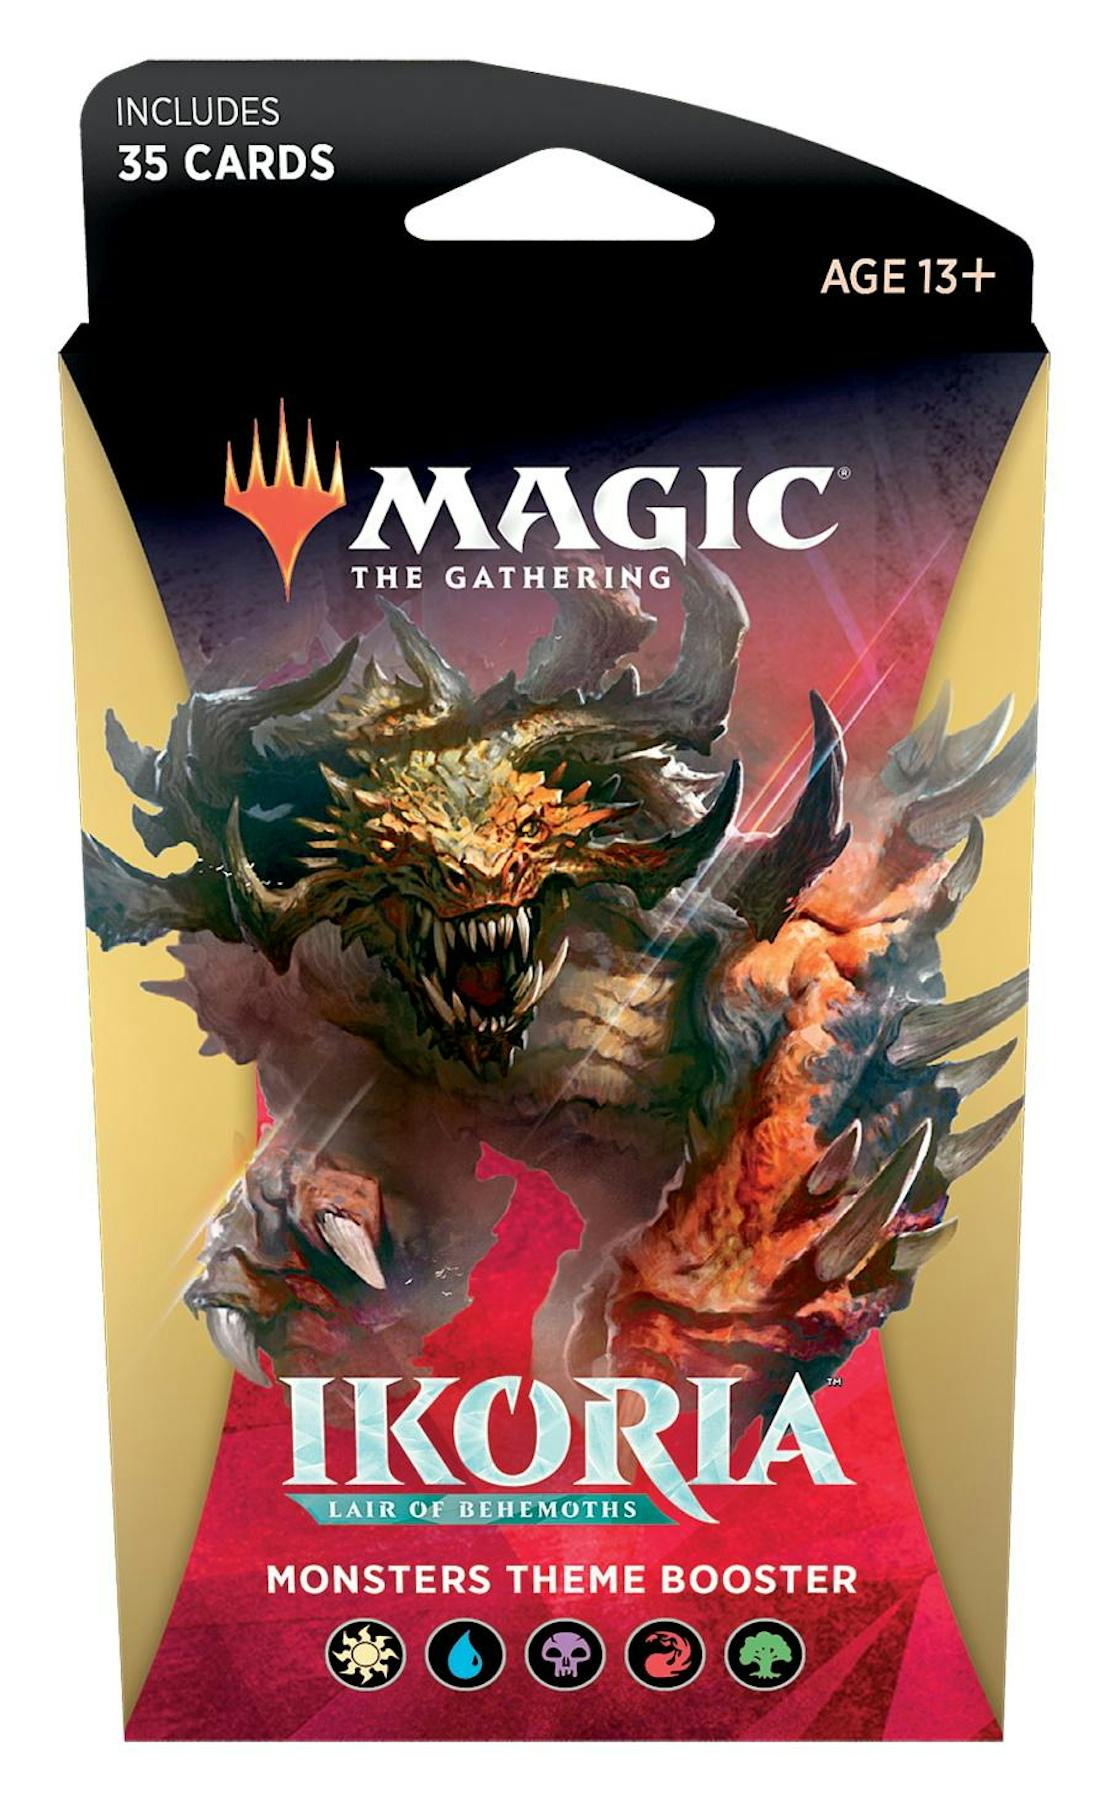 Ikoria Collector Booster Box Contents